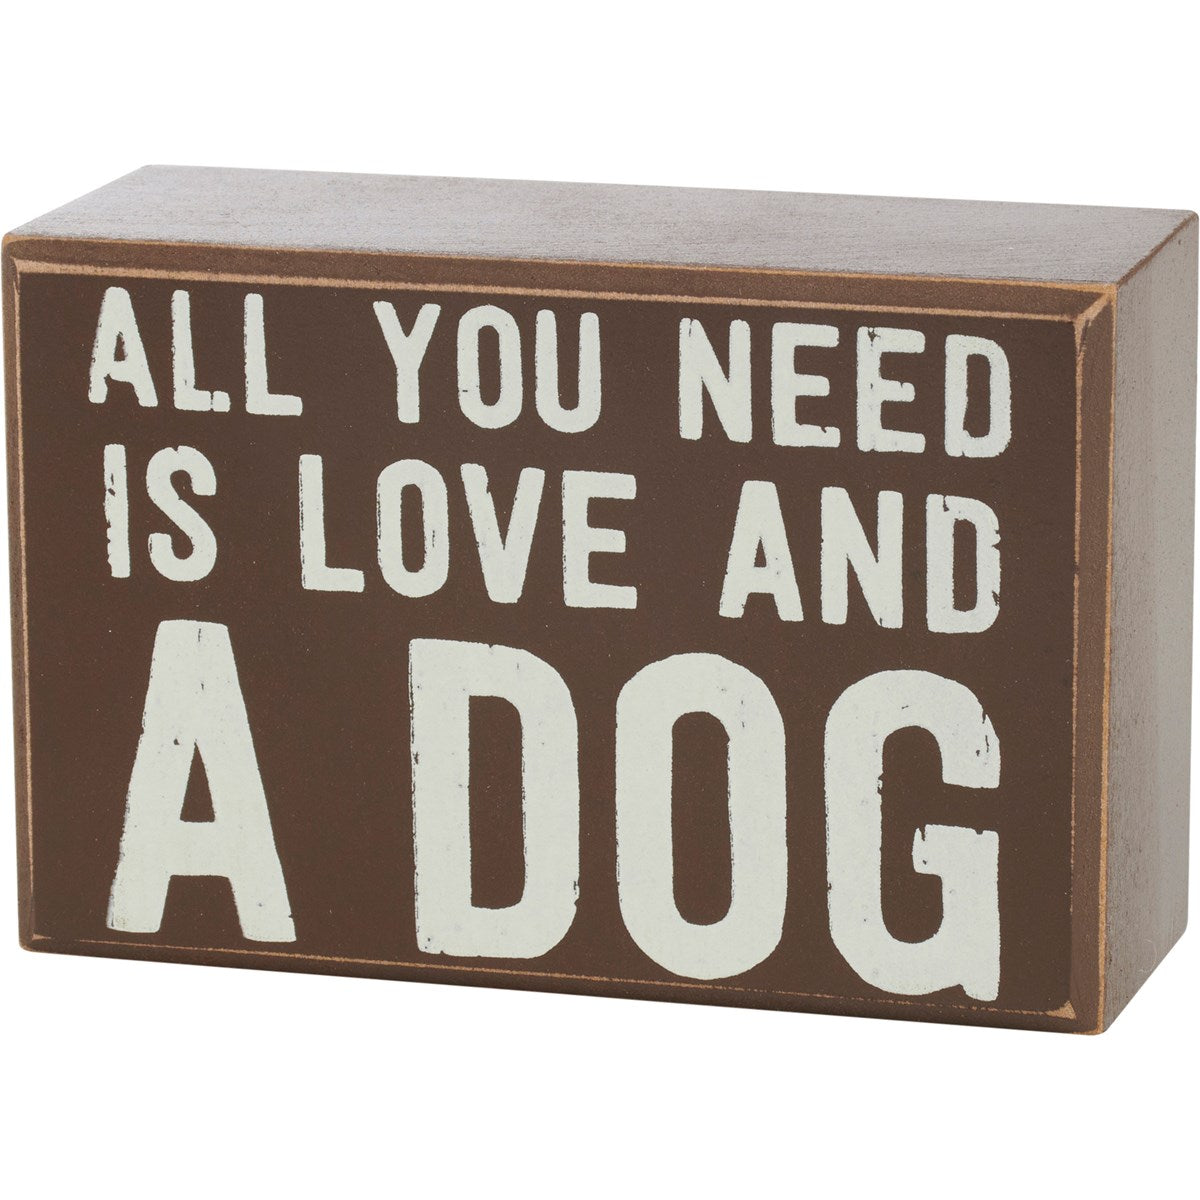 Socks & Box Sign Set "All You Need Is Love And A Dog"